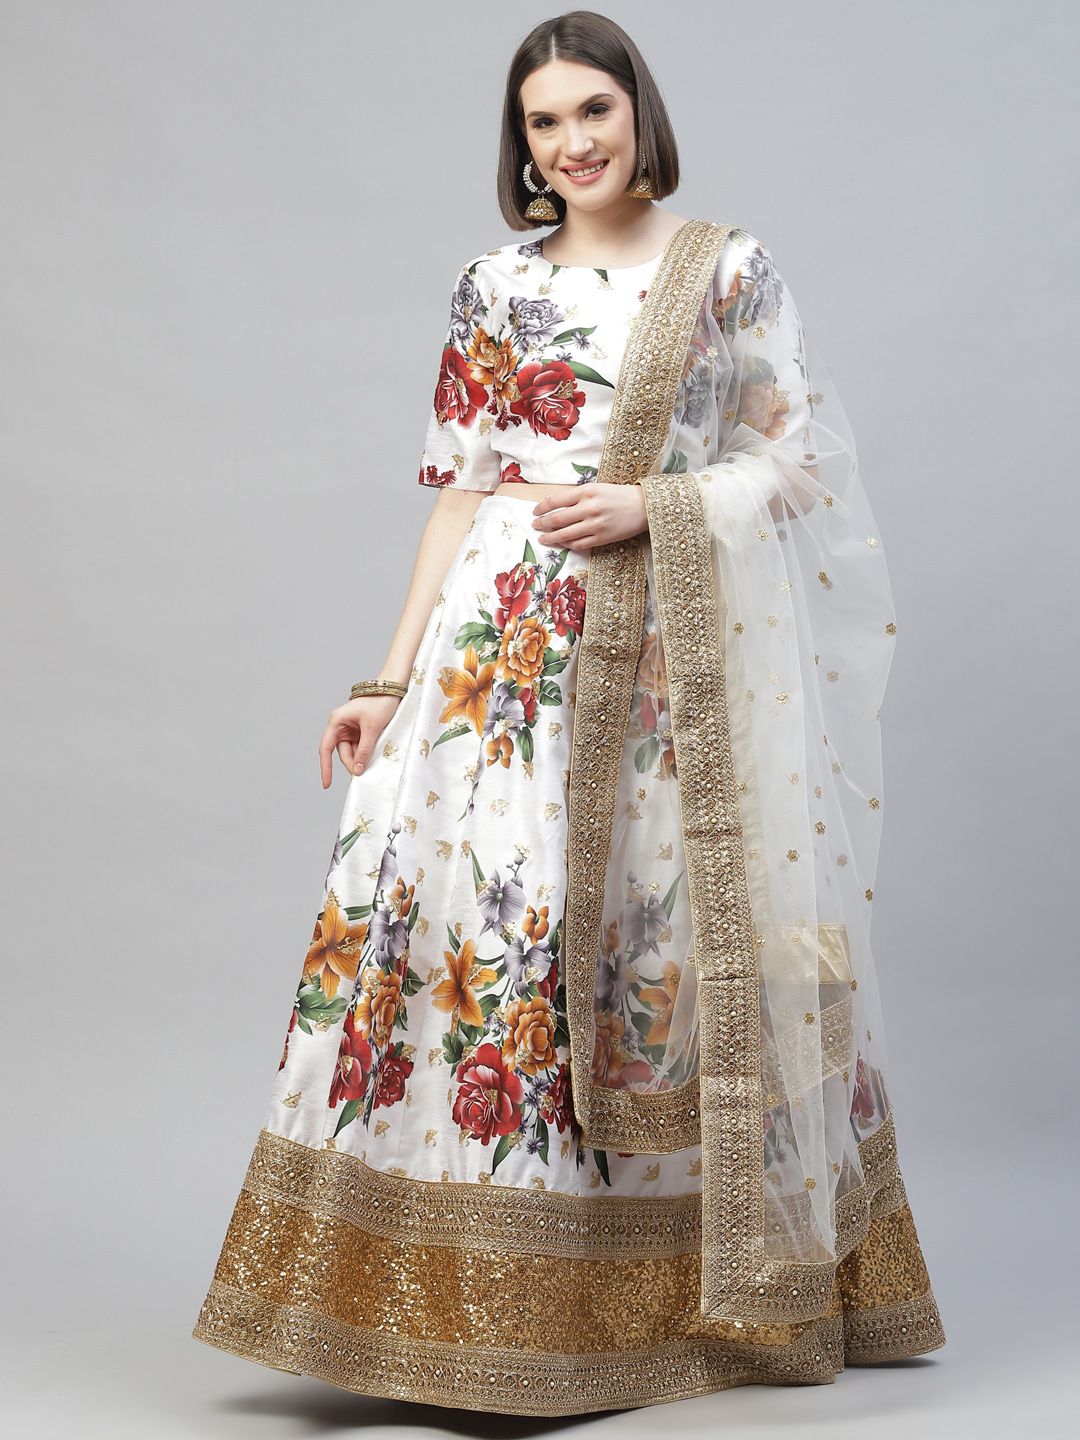 Readiprint Fashions White & Red Printed Sequinned Semi-Stitched Lehenga & Unstitched Blouse With Dupatta Price in India